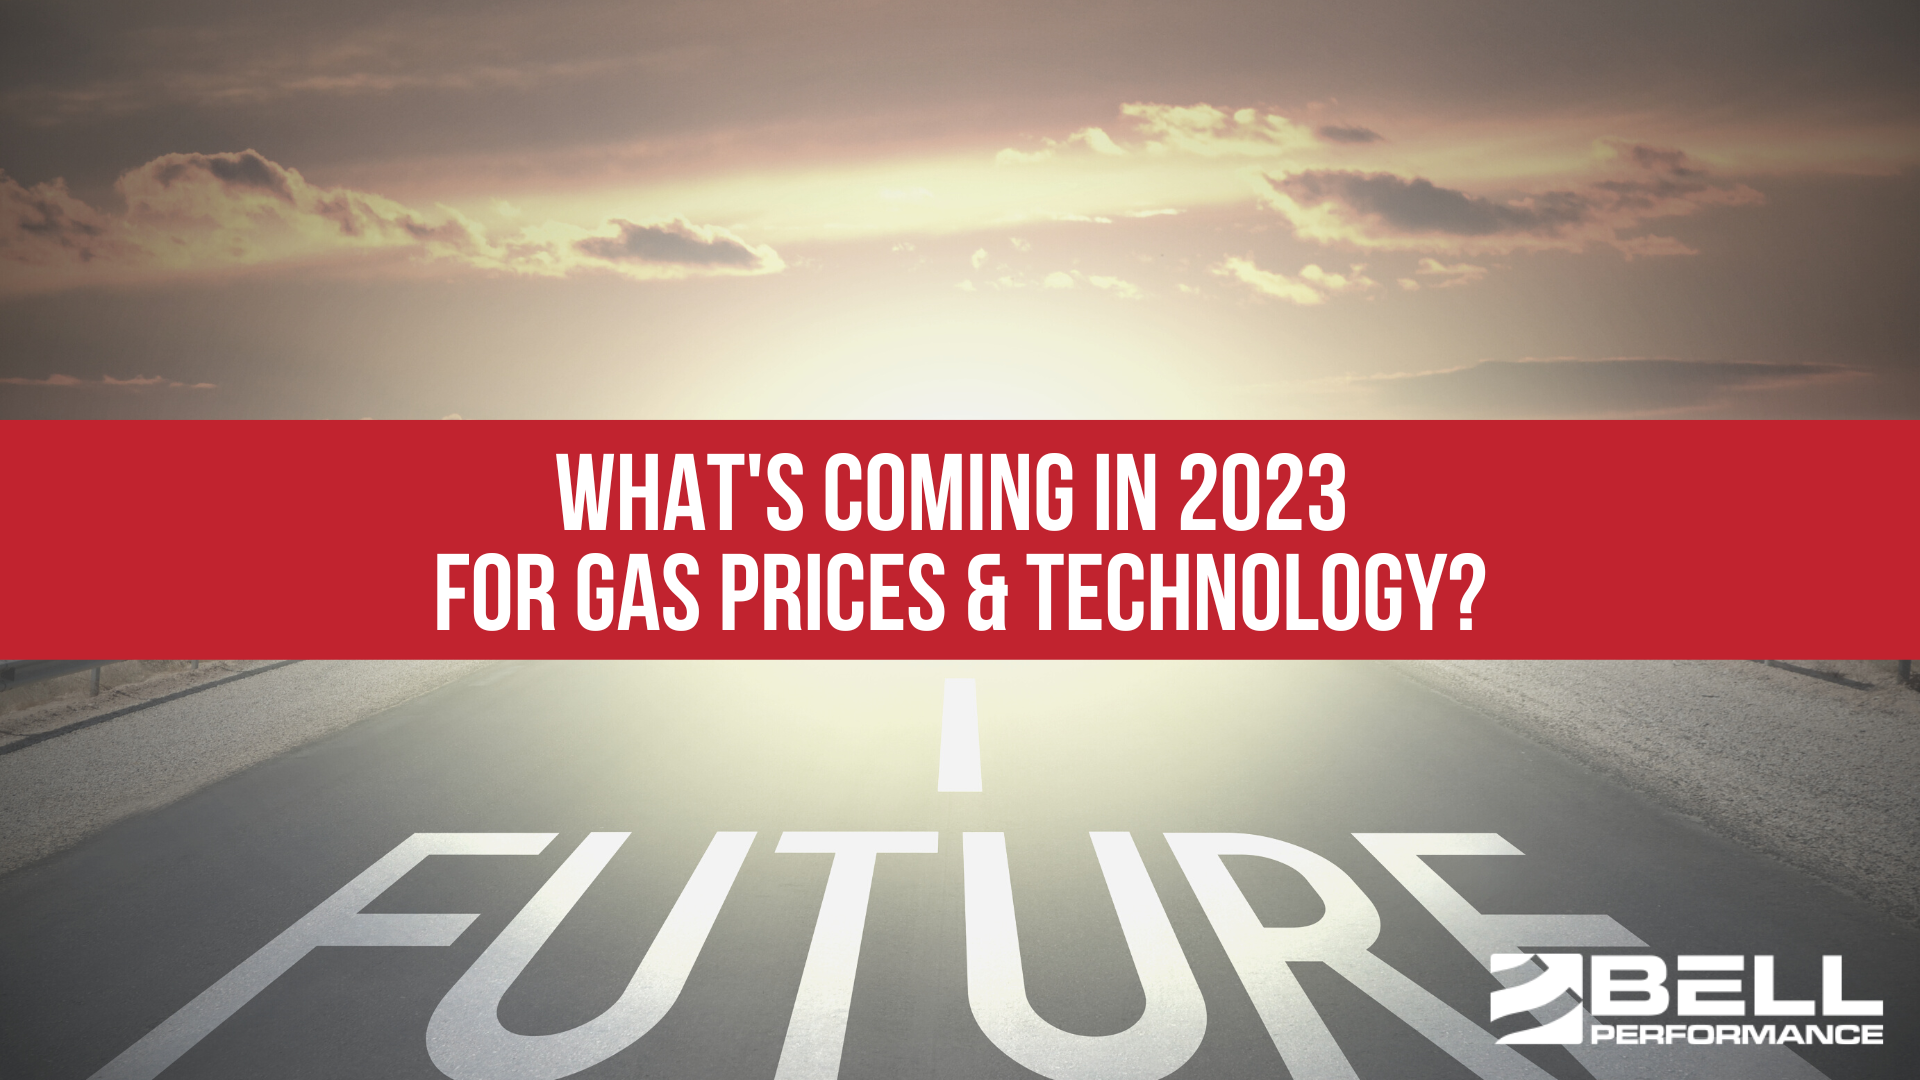 What's Coming In 2023 For Gas Prices & Technology?